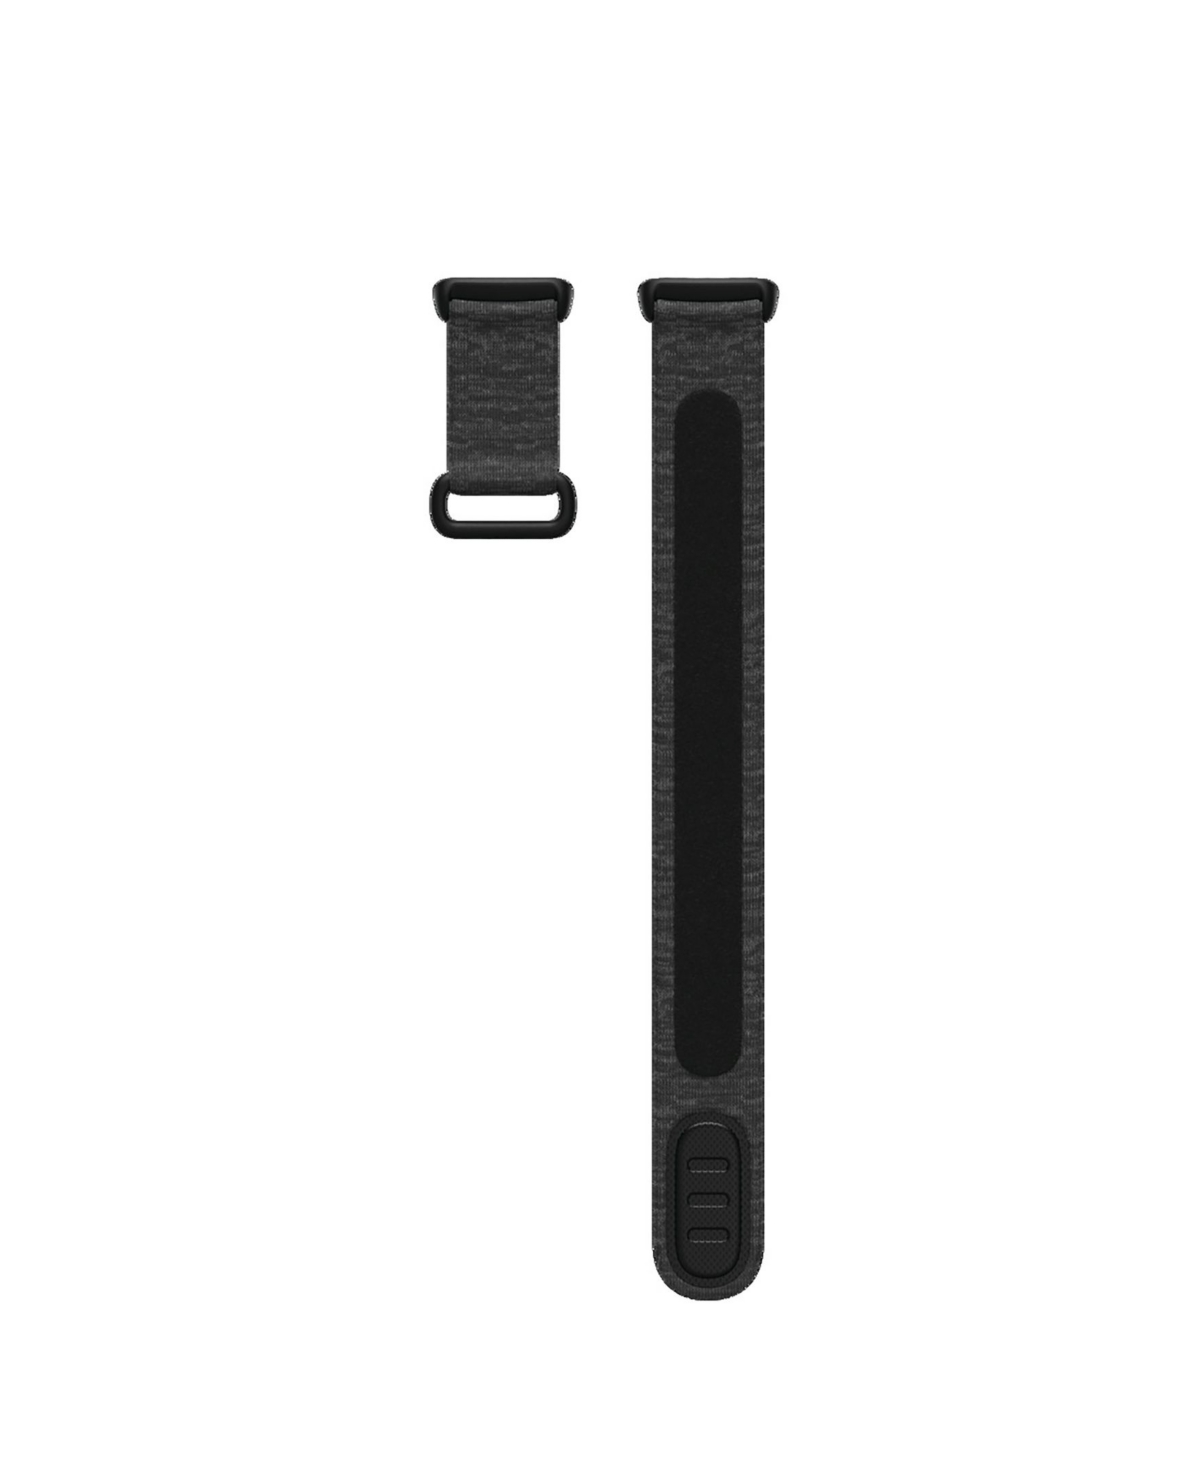 Charge 5 Charcoal Nylon and Polyester Hook and Loop Band, Small - Charcoal